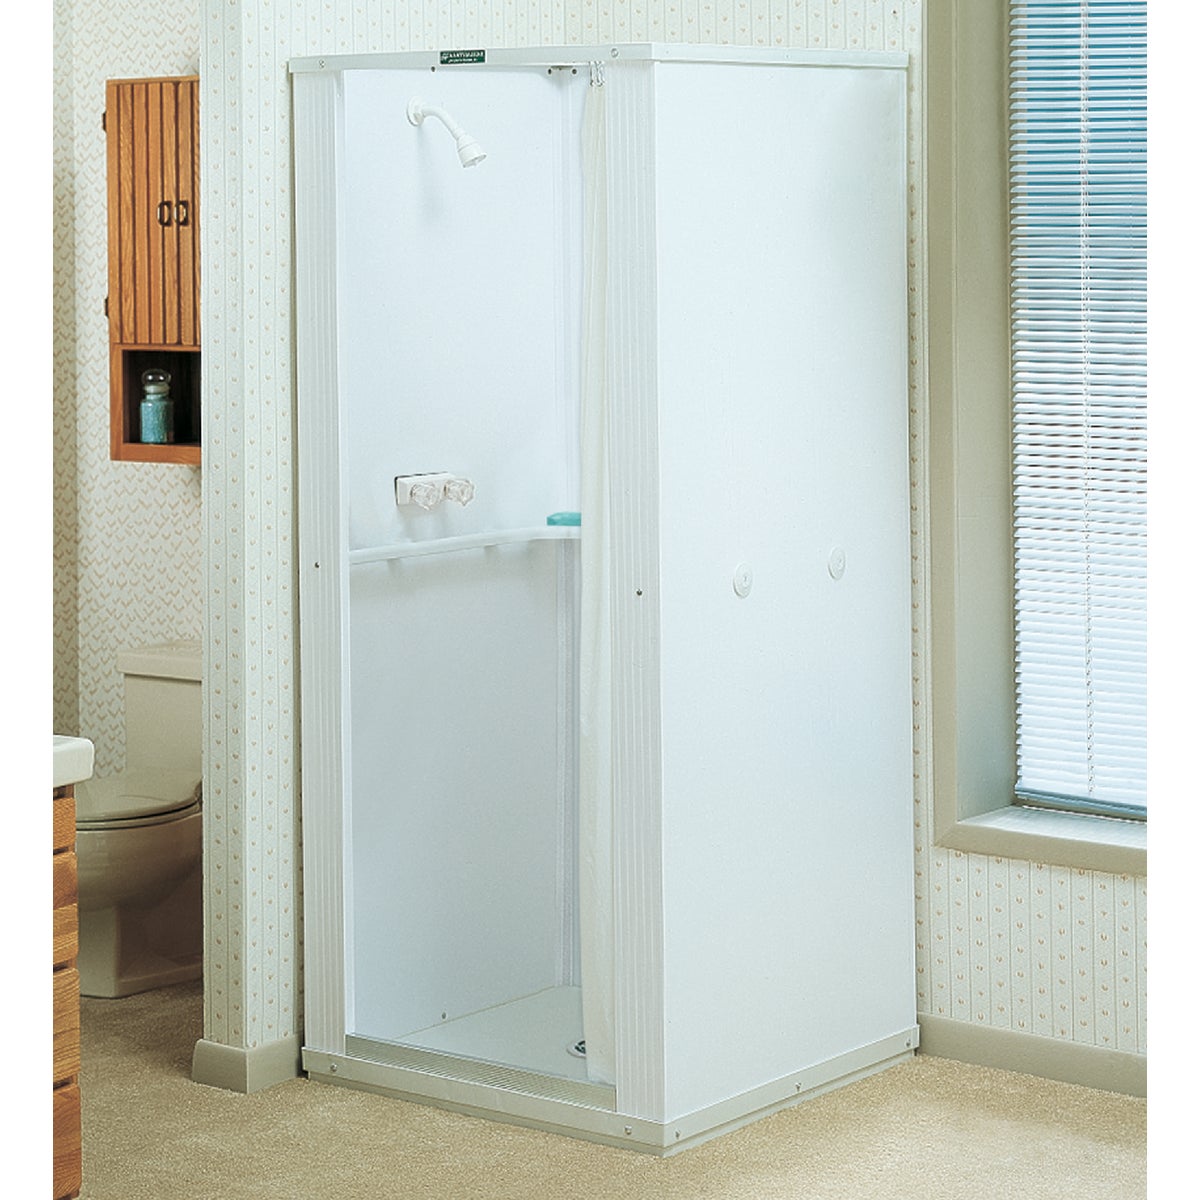 Item 440507, Free-standing shower with aluminum front. Knock down (KD) construction.